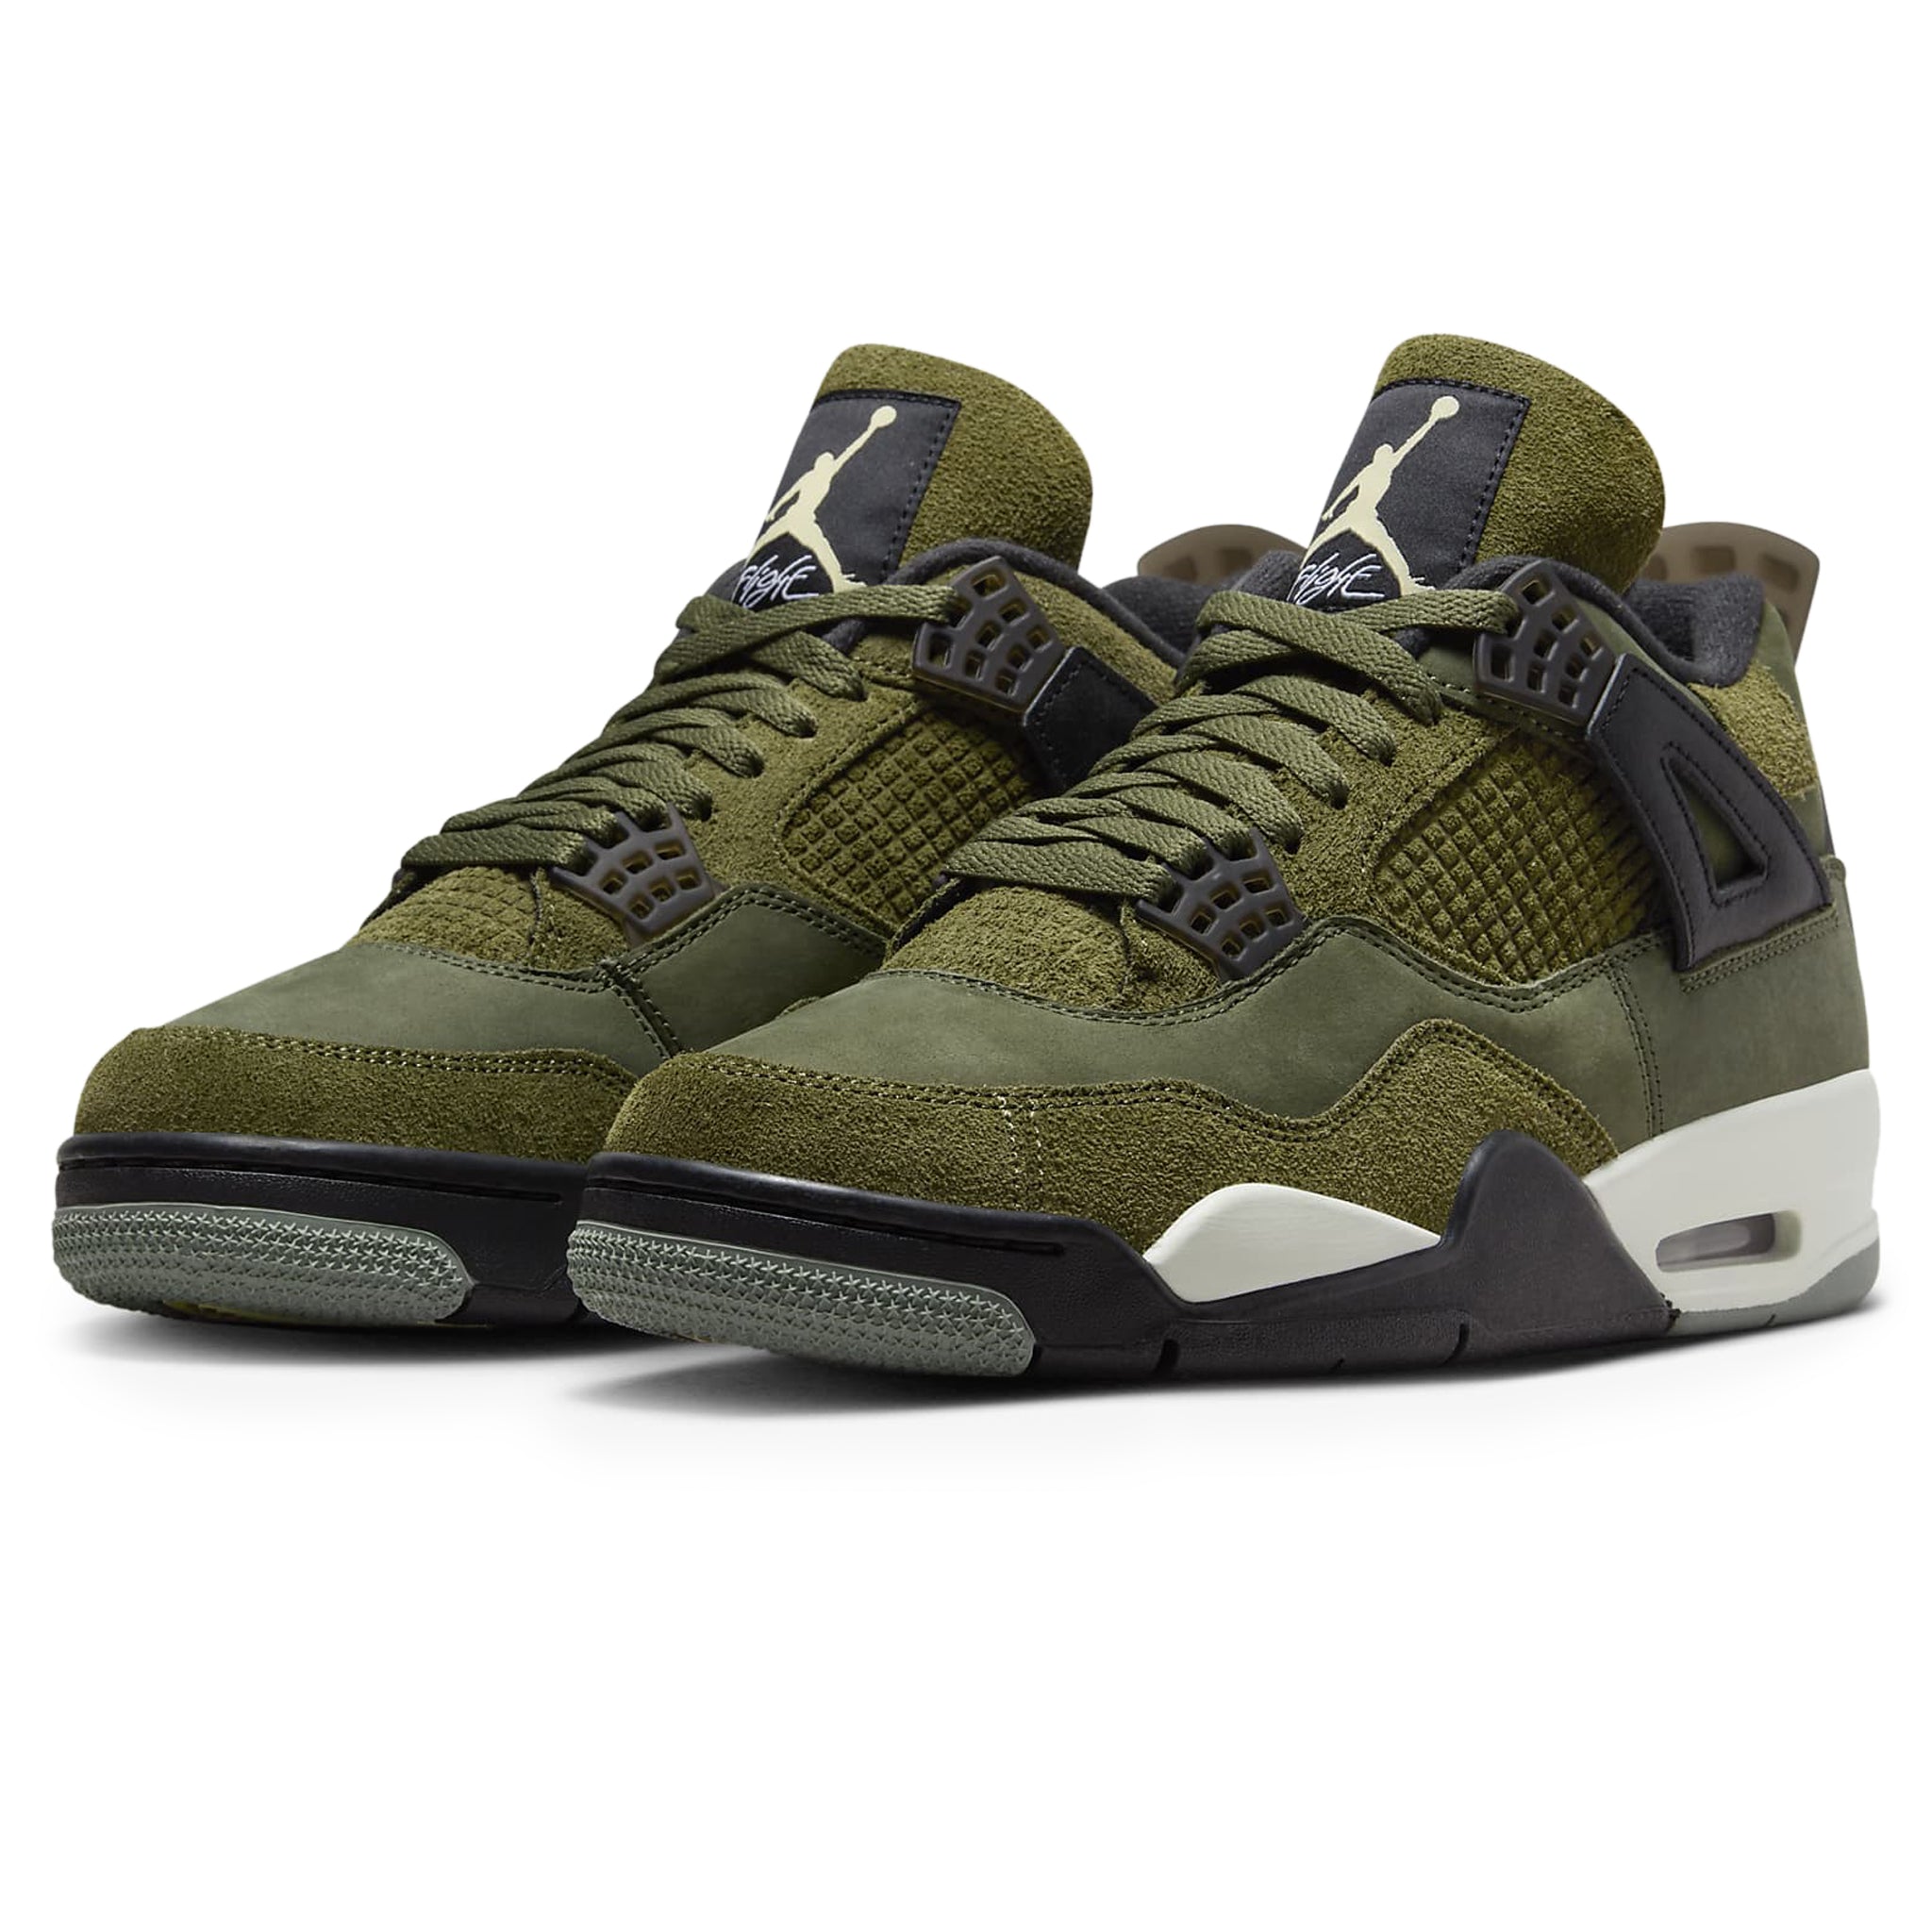 Front side view of Air Jordan 4 Retro SE Craft Olive FB9927-200